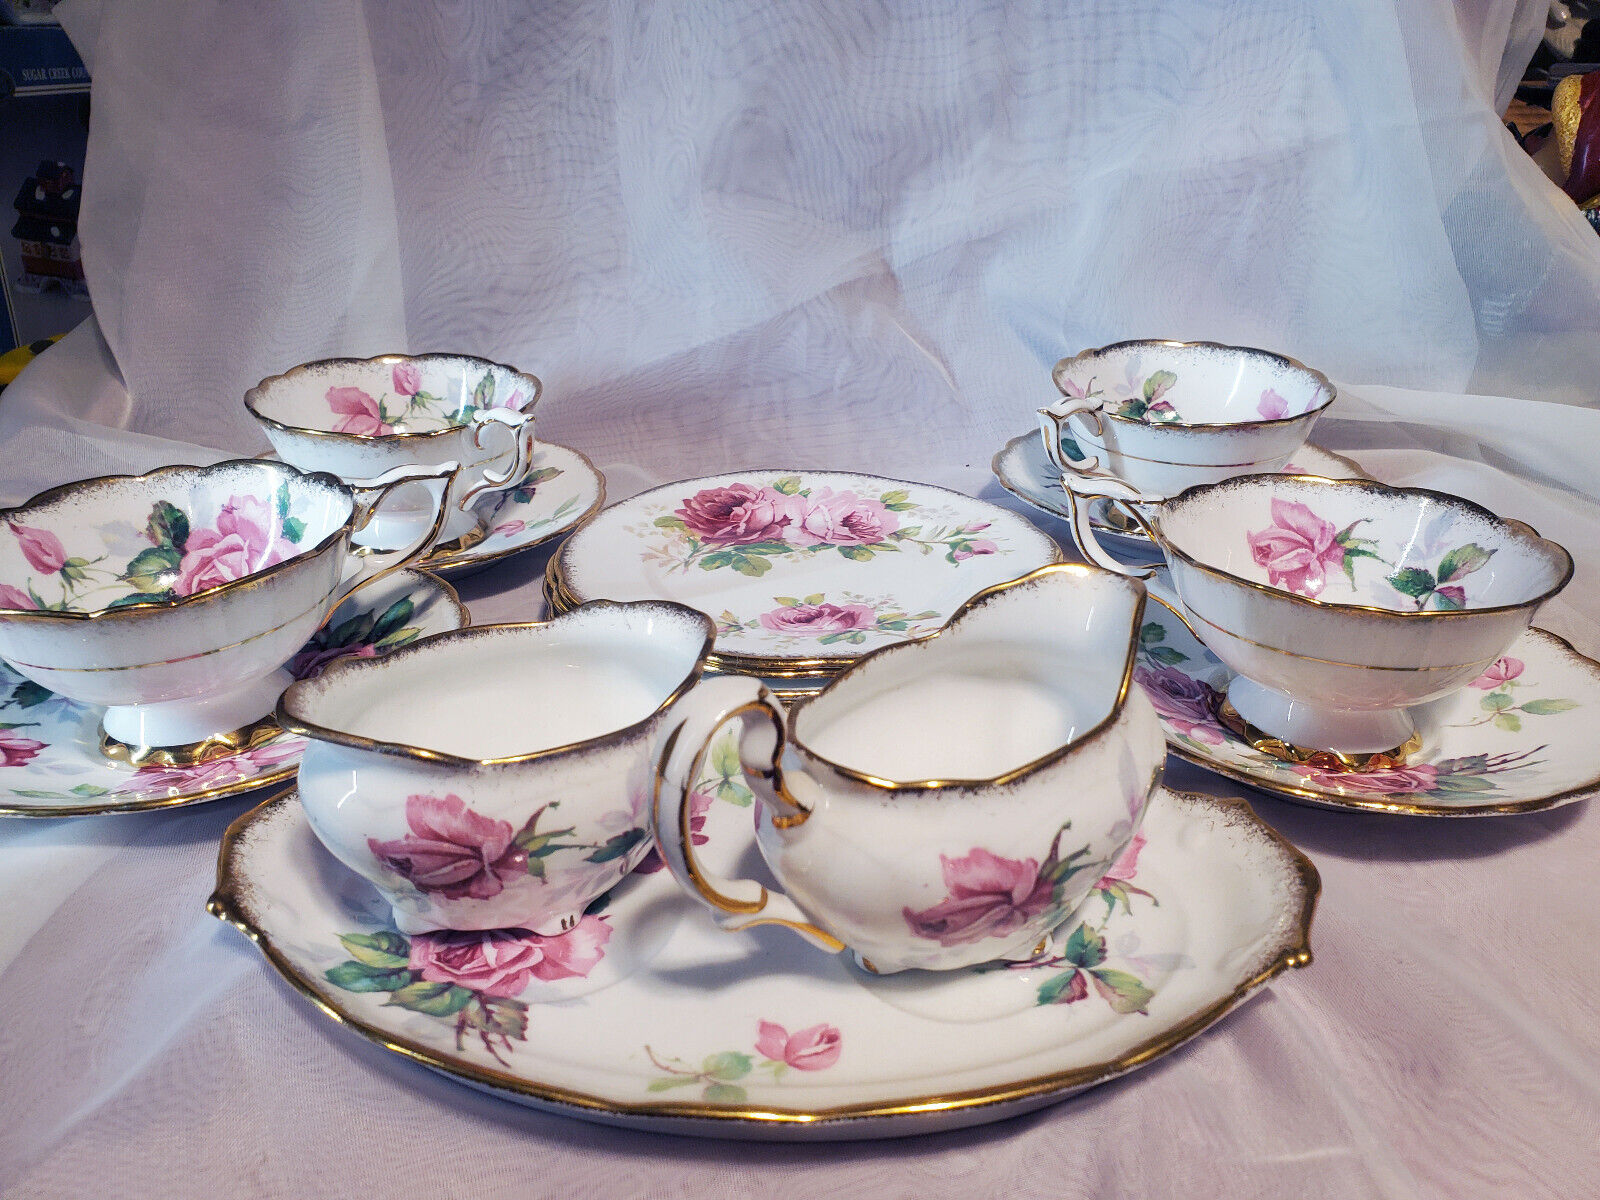 Royal Stafford Berkley Rose with Gold Trim 15 Pc Tea Set See Listing For Details